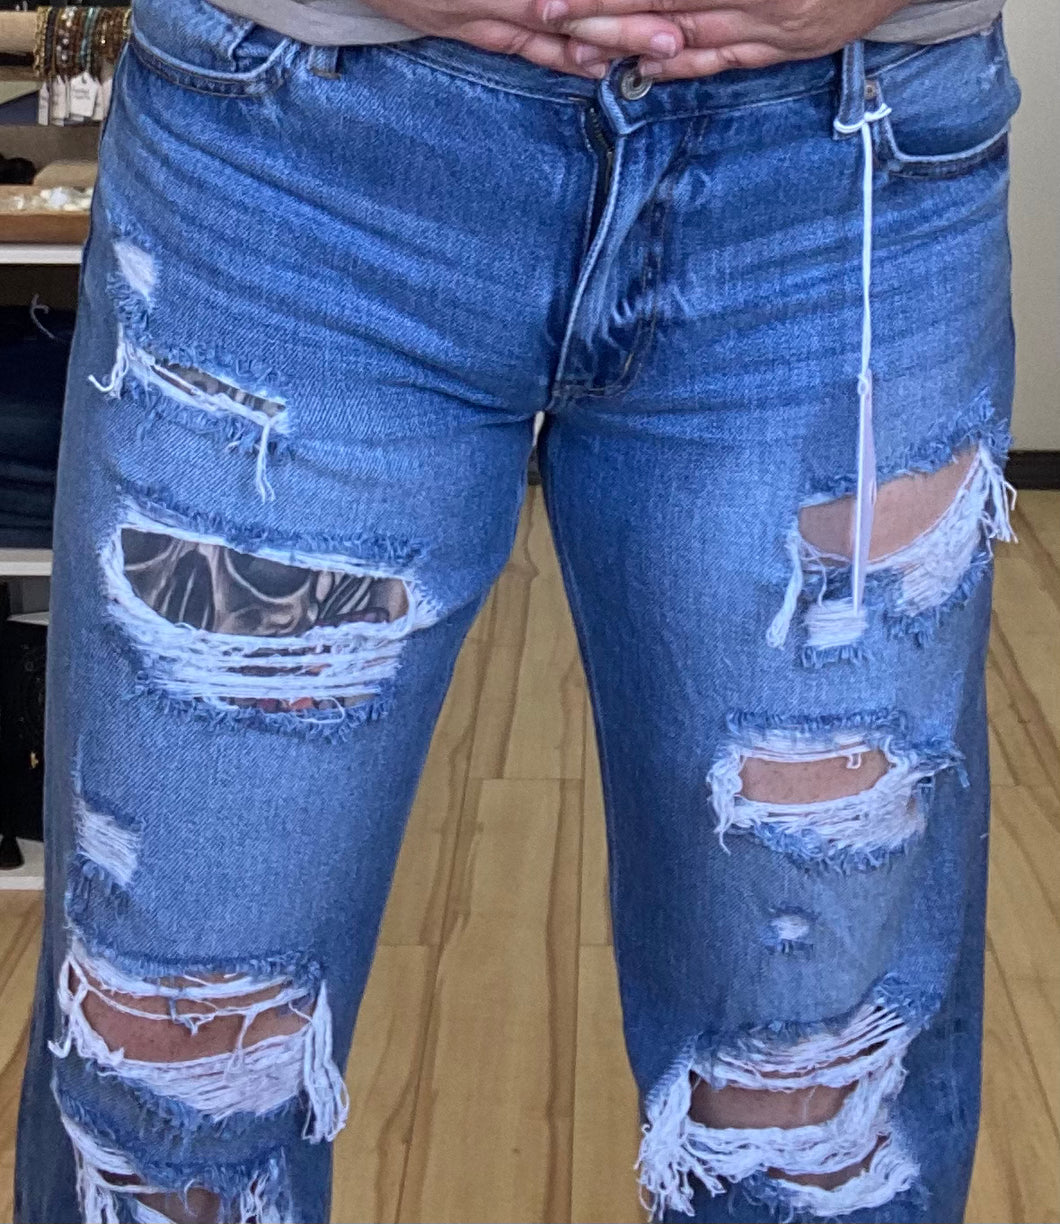 The “Even her friends call me Daddy” Jeans